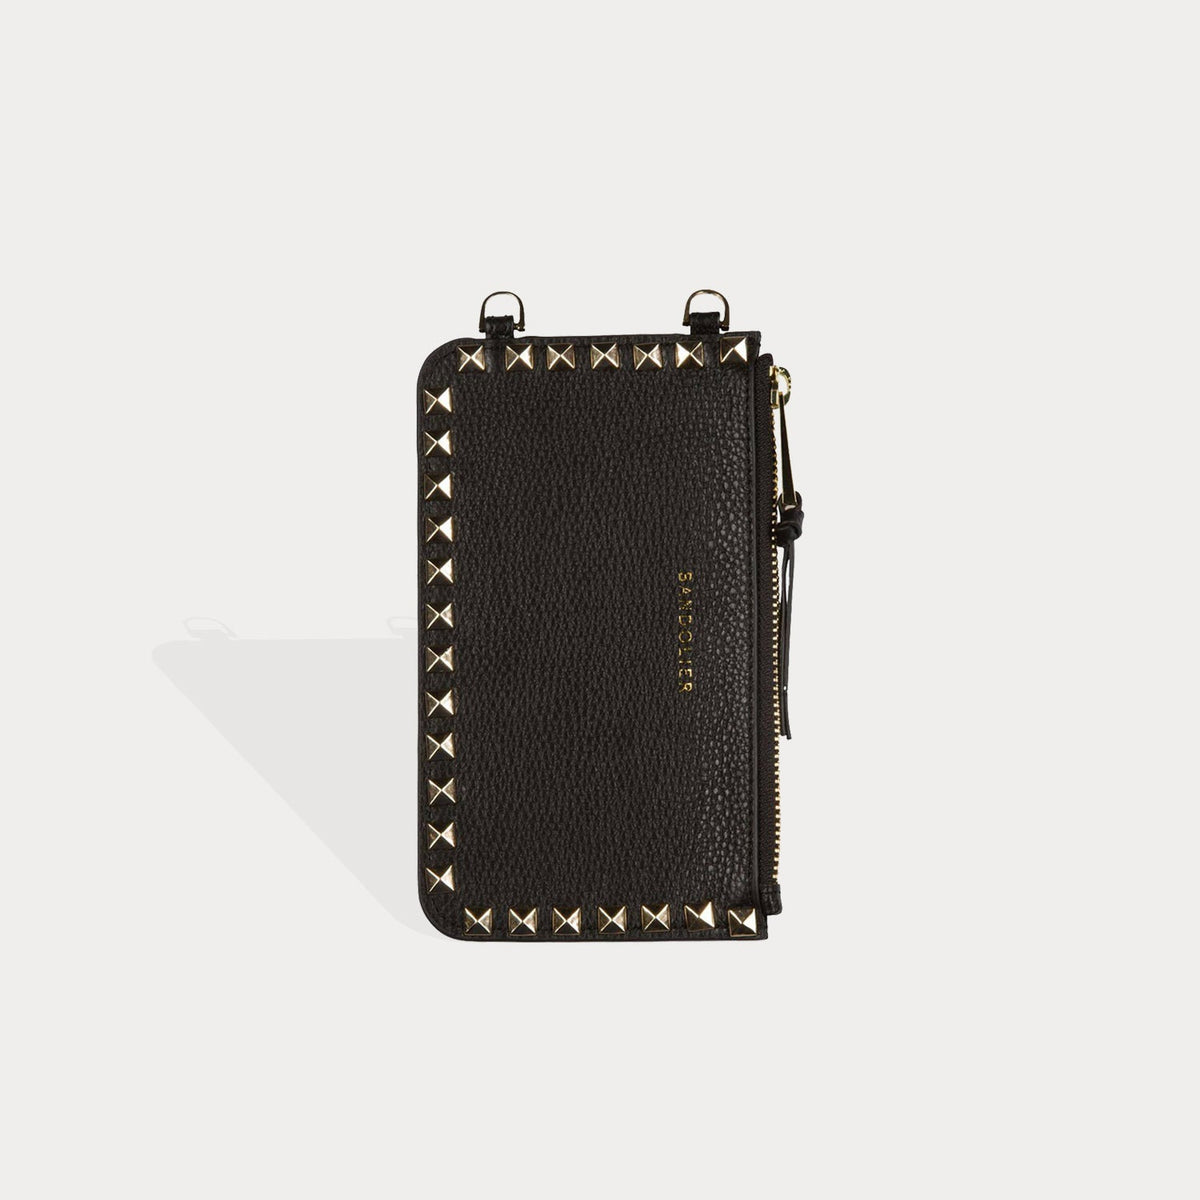 Pyramid Stud Pebble Leather Zip Pouch - Black/Gold – Bandolier